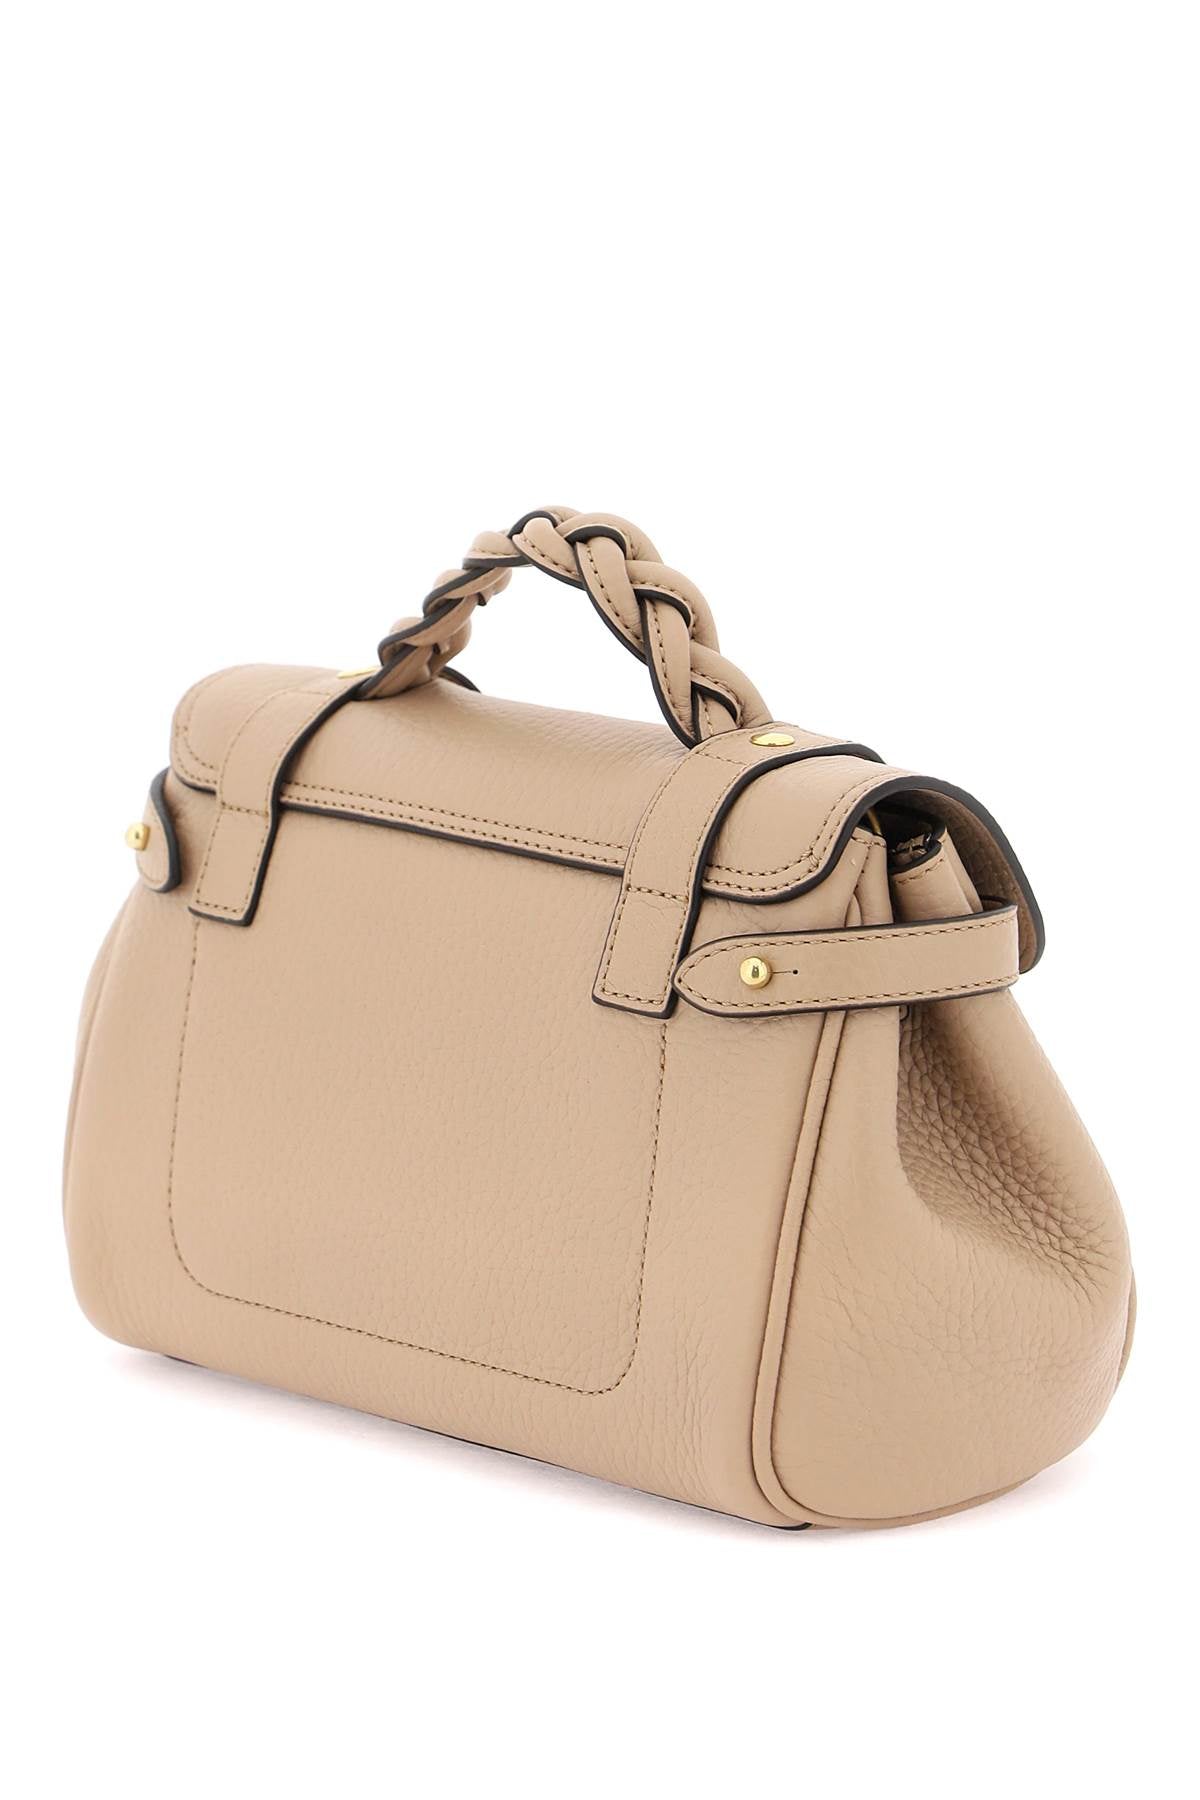 MULBERRY Chic Mini Tan Leather Handbag with Braided Handle and Gold-Tone Accents